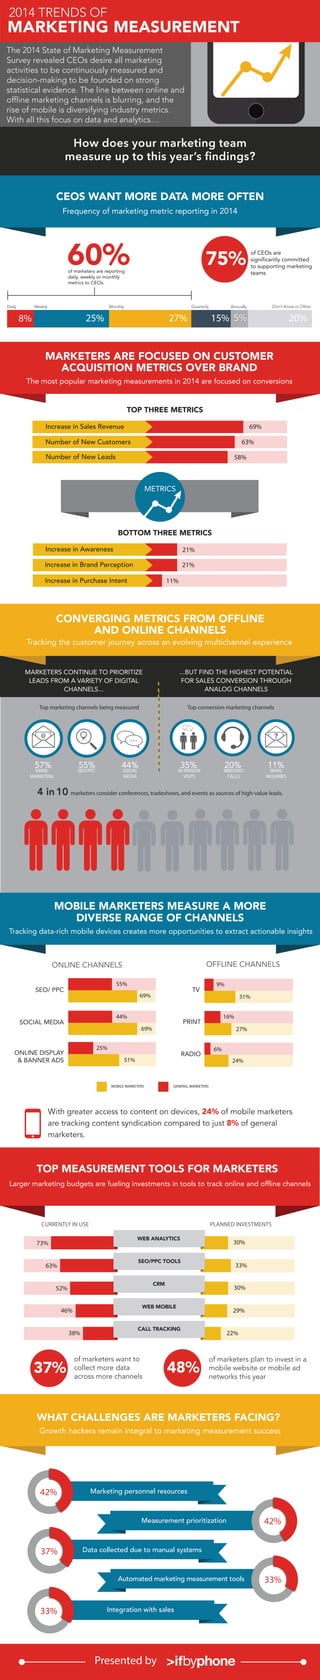 How does your marketing team
measure up to this year’s ﬁndings?
CEOS WANT MORE DATA MORE OFTEN
...BUT FIND THE HIGHEST POTENTIAL
FOR SALES CONVERSION THROUGH
ANALOG CHANNELS
MARKETERS CONTINUE TO PRIORITIZE
LEADS FROM A VARIETY OF DIGITAL
CHANNELS...
EMAIL
MARKETING
SEO/PPC SOCIAL
MEDIA
IN-PERSON
VISITS
INBOUND
CALLS
EMAIL
INQUIRIES
Top marketing channels being measured Top conversion marketing channels
4 in 10 marketers consider conferences, tradeshows, and events as sources of high-value leads.
SEO/ PPC
SOCIAL MEDIA
ONLINE DISPLAY
& BANNER ADS
55%
69%
44%
69%
25%
51%
TV
PRINT
RADIO
9%
31%
16%
27%
6%
24%
ONLINE CHANNELS OFFLINE CHANNELS
CURRENTLY IN USE PLANNED INVESTMENTS
73%
63%
52%
46%
38%
30%
33%
30%
29%
22%
SEO/PPC TOOLS
CRM
WEB MOBILE
WEB ANALYTICS
CALL TRACKING
TOP MEASUREMENT TOOLS FOR MARKETERS
Marketing personnel resources
Measurement prioritization
Data collected due to manual systems
Automated marketing measurement tools
42%
42%
37%
33%
Integration with sales33%
Presented by
69%
63%Number of New Customers
58%Number of New Leads
21%
Increase in Sales Revenue
21%Increase in Brand Perception
11%Increase in Purchase Intent
METRICS
TOP THREE METRICS
BOTTOM THREE METRICS
MOBILE MARKETERS GENERAL MARKETERS
25%8% 27% 5%
Daily Weekly Monthly Annually Don’t Know or Other
20%
Quarterly
15%
60%of marketers are reporting
daily, weekly or monthly
metrics to CEOs.
Frequency of marketing metric reporting in 2014
The 2014 State of Marketing Measurement
Survey revealed CEOs desire all marketing
activities to be continuously measured and
decision-making to be founded on strong
statistical evidence. The line between online and
offline marketing channels is blurring, and the
rise of mobile is diversifying industry metrics.
With all this focus on data and analytics…
75%
of CEOs are
significantly committed
to supporting marketing
teams
MARKETERS ARE FOCUSED ON CUSTOMER
ACQUISITION METRICS OVER BRAND
MOBILE MARKETERS MEASURE A MORE
DIVERSE RANGE OF CHANNELS
WHAT CHALLENGES ARE MARKETERS FACING?
57% 55% 44% 35% 20% 11%
The most popular marketing measurements in 2014 are focused on conversions
CONVERGING METRICS FROM OFFLINE
AND ONLINE CHANNELS
Tracking the customer journey across an evolving multichannel experience
With greater access to content on devices, 24% of mobile marketers
are tracking content syndication compared to just 8% of general
marketers.
Tracking data-rich mobile devices creates more opportunities to extract actionable insights
Larger marketing budgets are fueling investments in tools to track online and offline channels
Growth hackers remain integral to marketing measurement success
37% 48%
of marketers want to
collect more data
across more channels
of marketers plan to invest in a
mobile website or mobile ad
networks this year
MARKETING MEASUREMENT
2014 TRENDS OF
Increase in Awareness
 